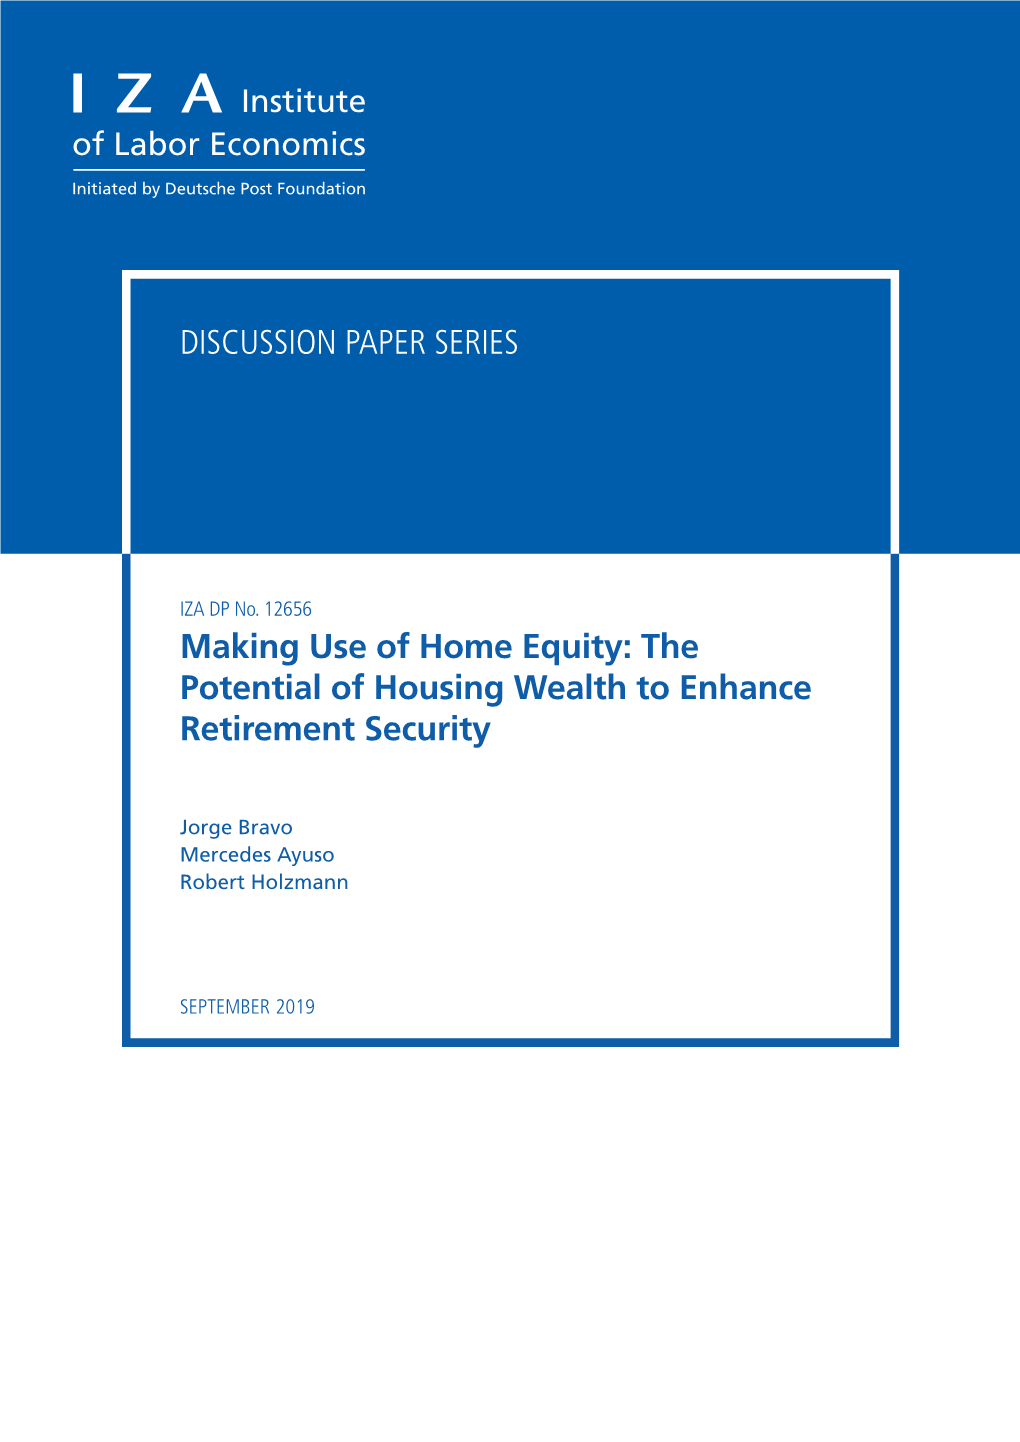 Making Use of Home Equity: the Potential of Housing Wealth to Enhance Retirement Security